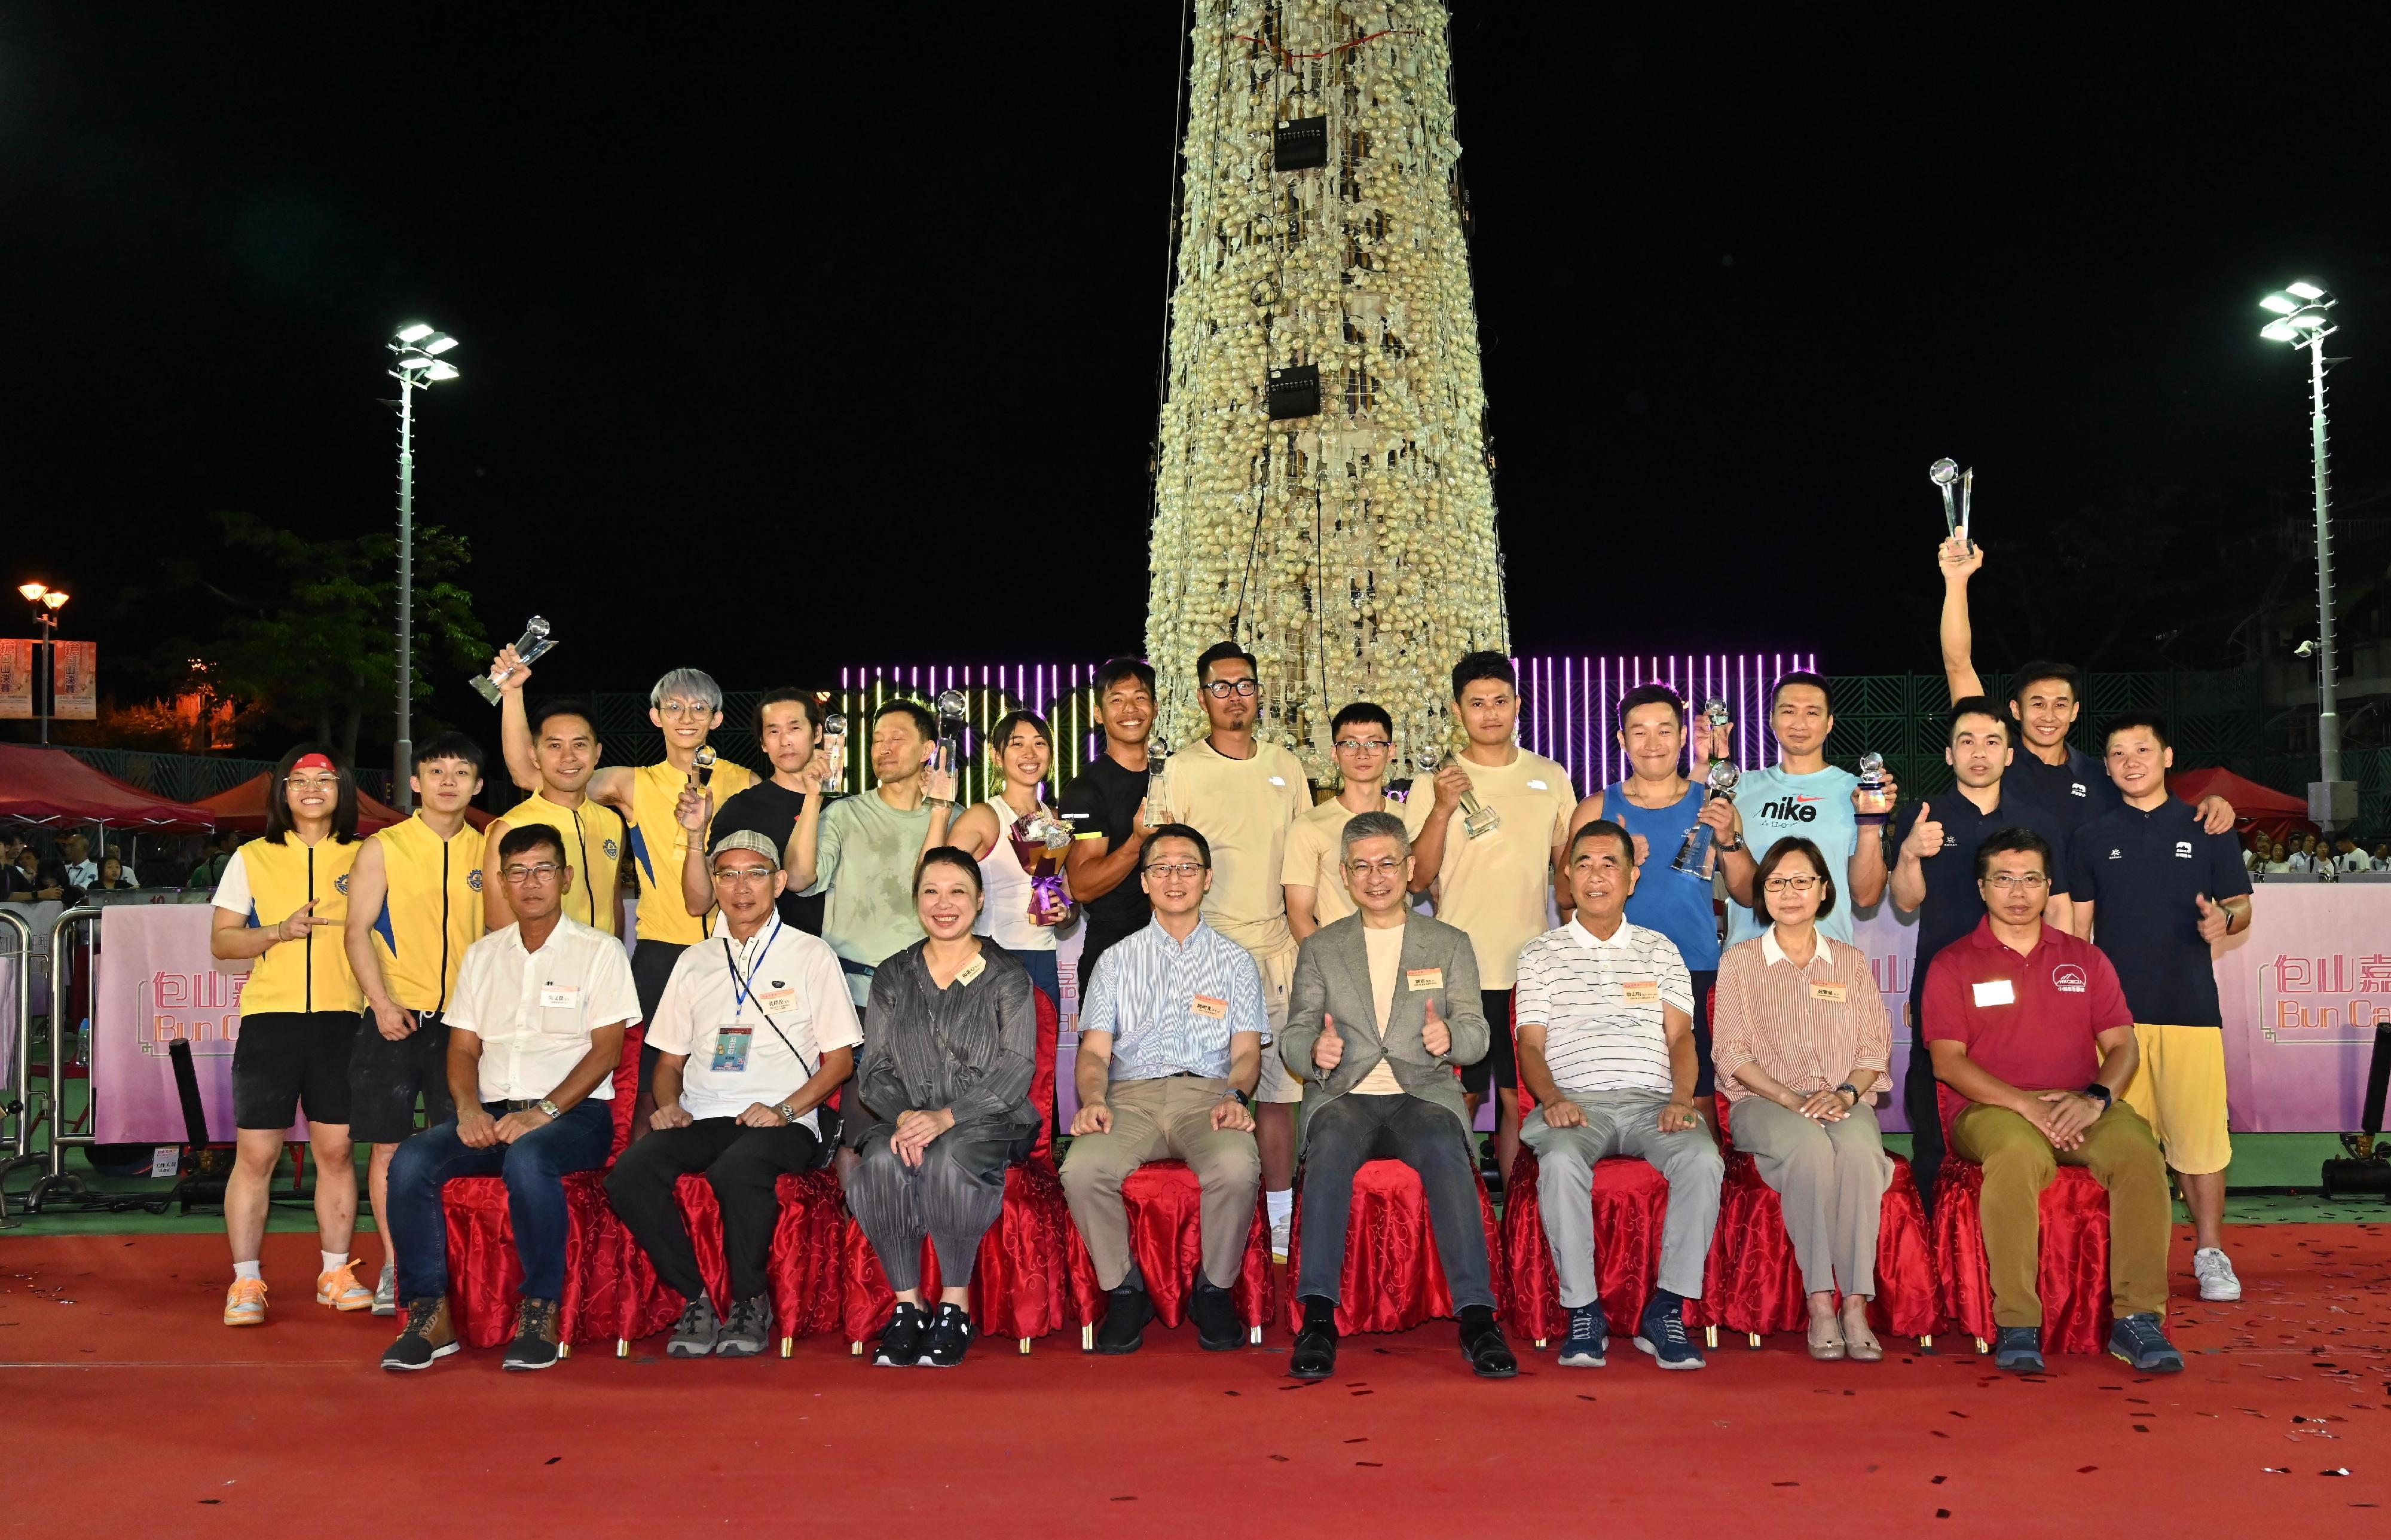 The Bun Scrambling Final in Cheung Chau concluded early this morning (May 16). The Acting Secretary for Culture, Sports and Tourism, Mr Raistlin Lau (front row, fourth right); the Director of Leisure and Cultural Services, Mr Vincent Liu (front row, fourth left); the Chairman of the Hong Kong Cheung Chau Bun Festival Committee, Mr Yung Chi-ming (front row, third right); the Chairman of the Islands District Council, Miss Amy Yeung (front row, third left); and other officiating guests are pictured with the winners.